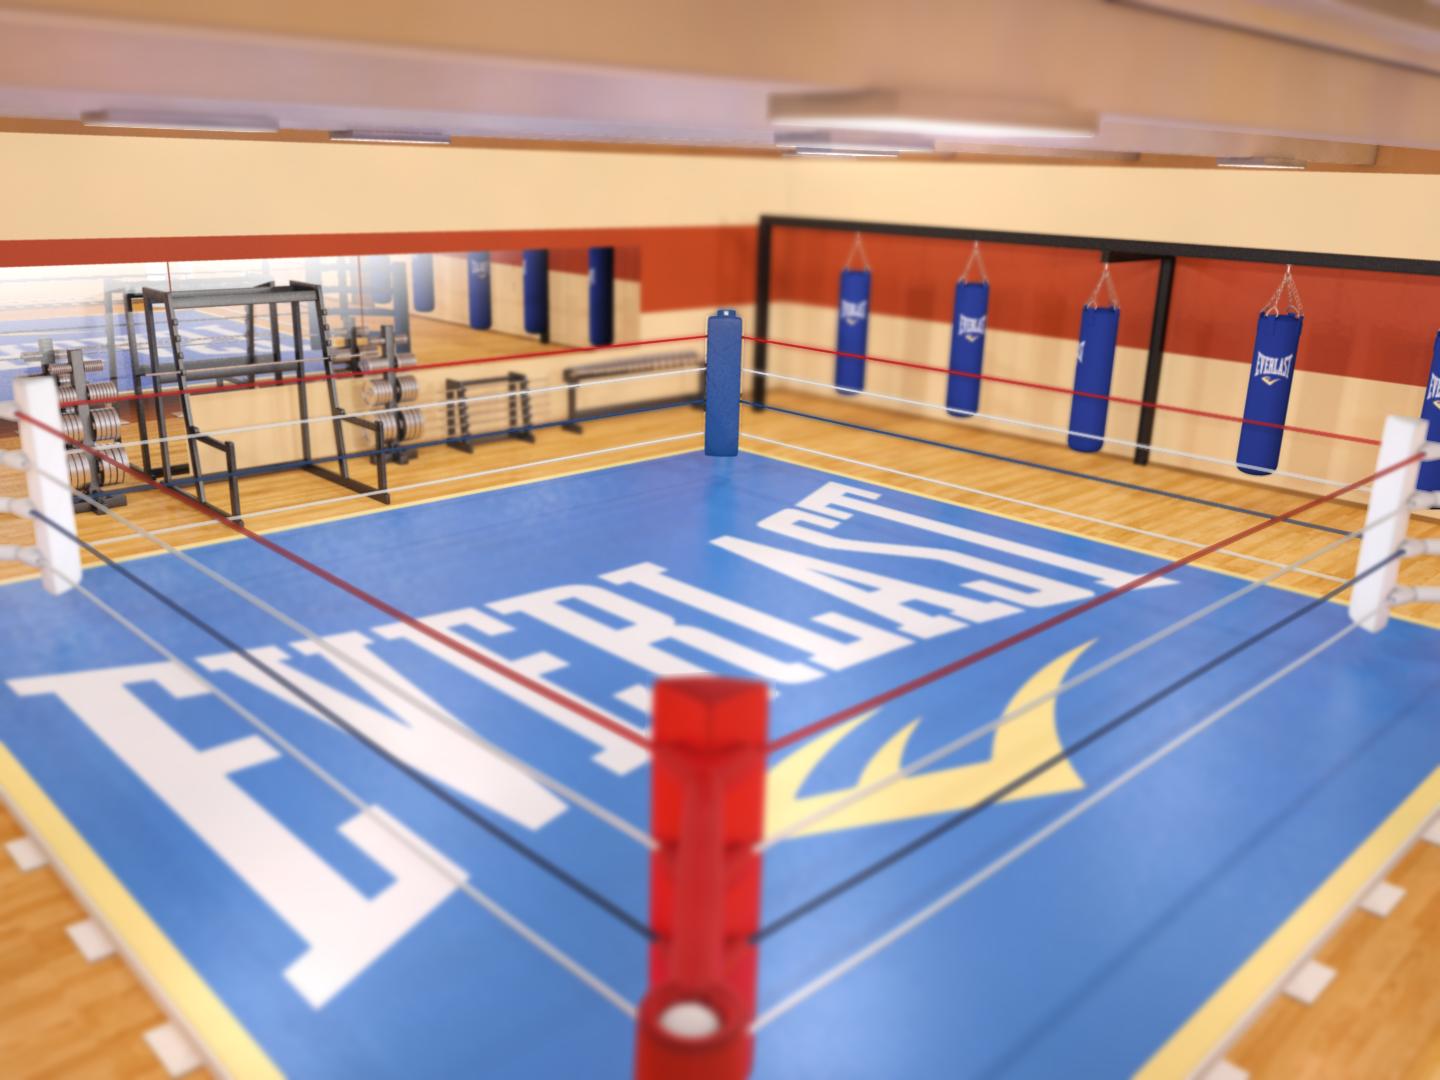 Boxing Gym With Dof By Ficdogg